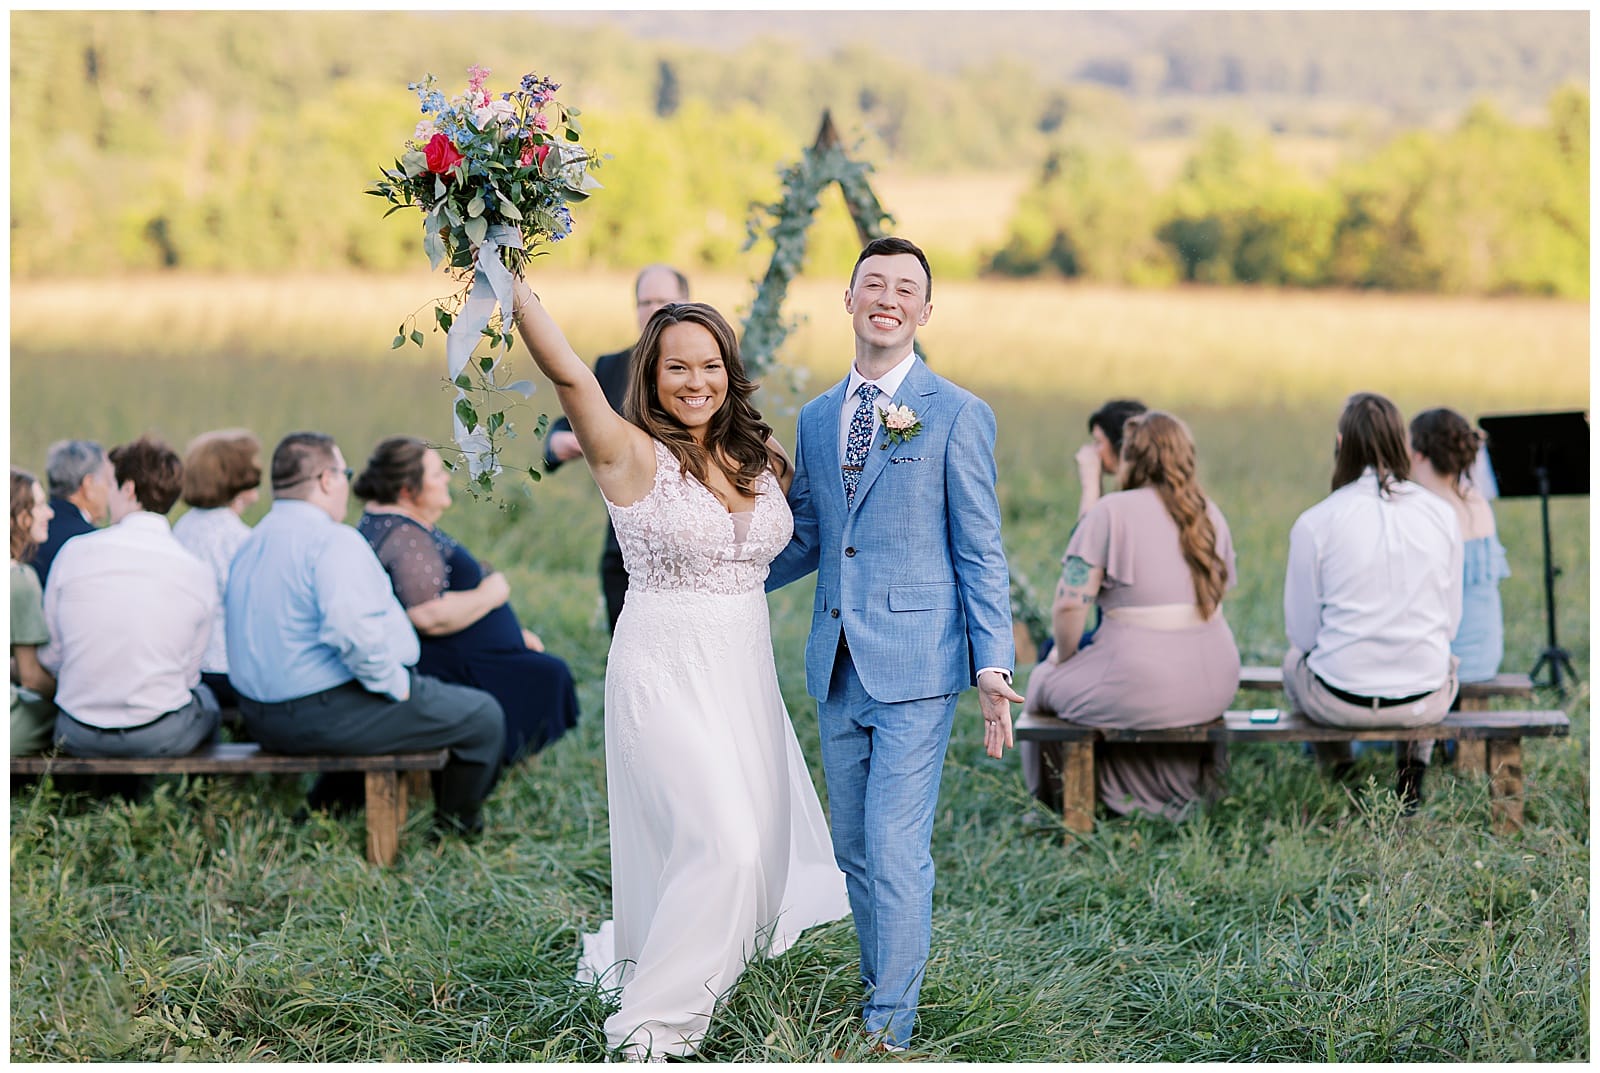 A woman in a wedding dress holds a bouquet high above her head while holding hands with a groom in a tux smiling straight at the camera in the middle of a field in the smoky mountains